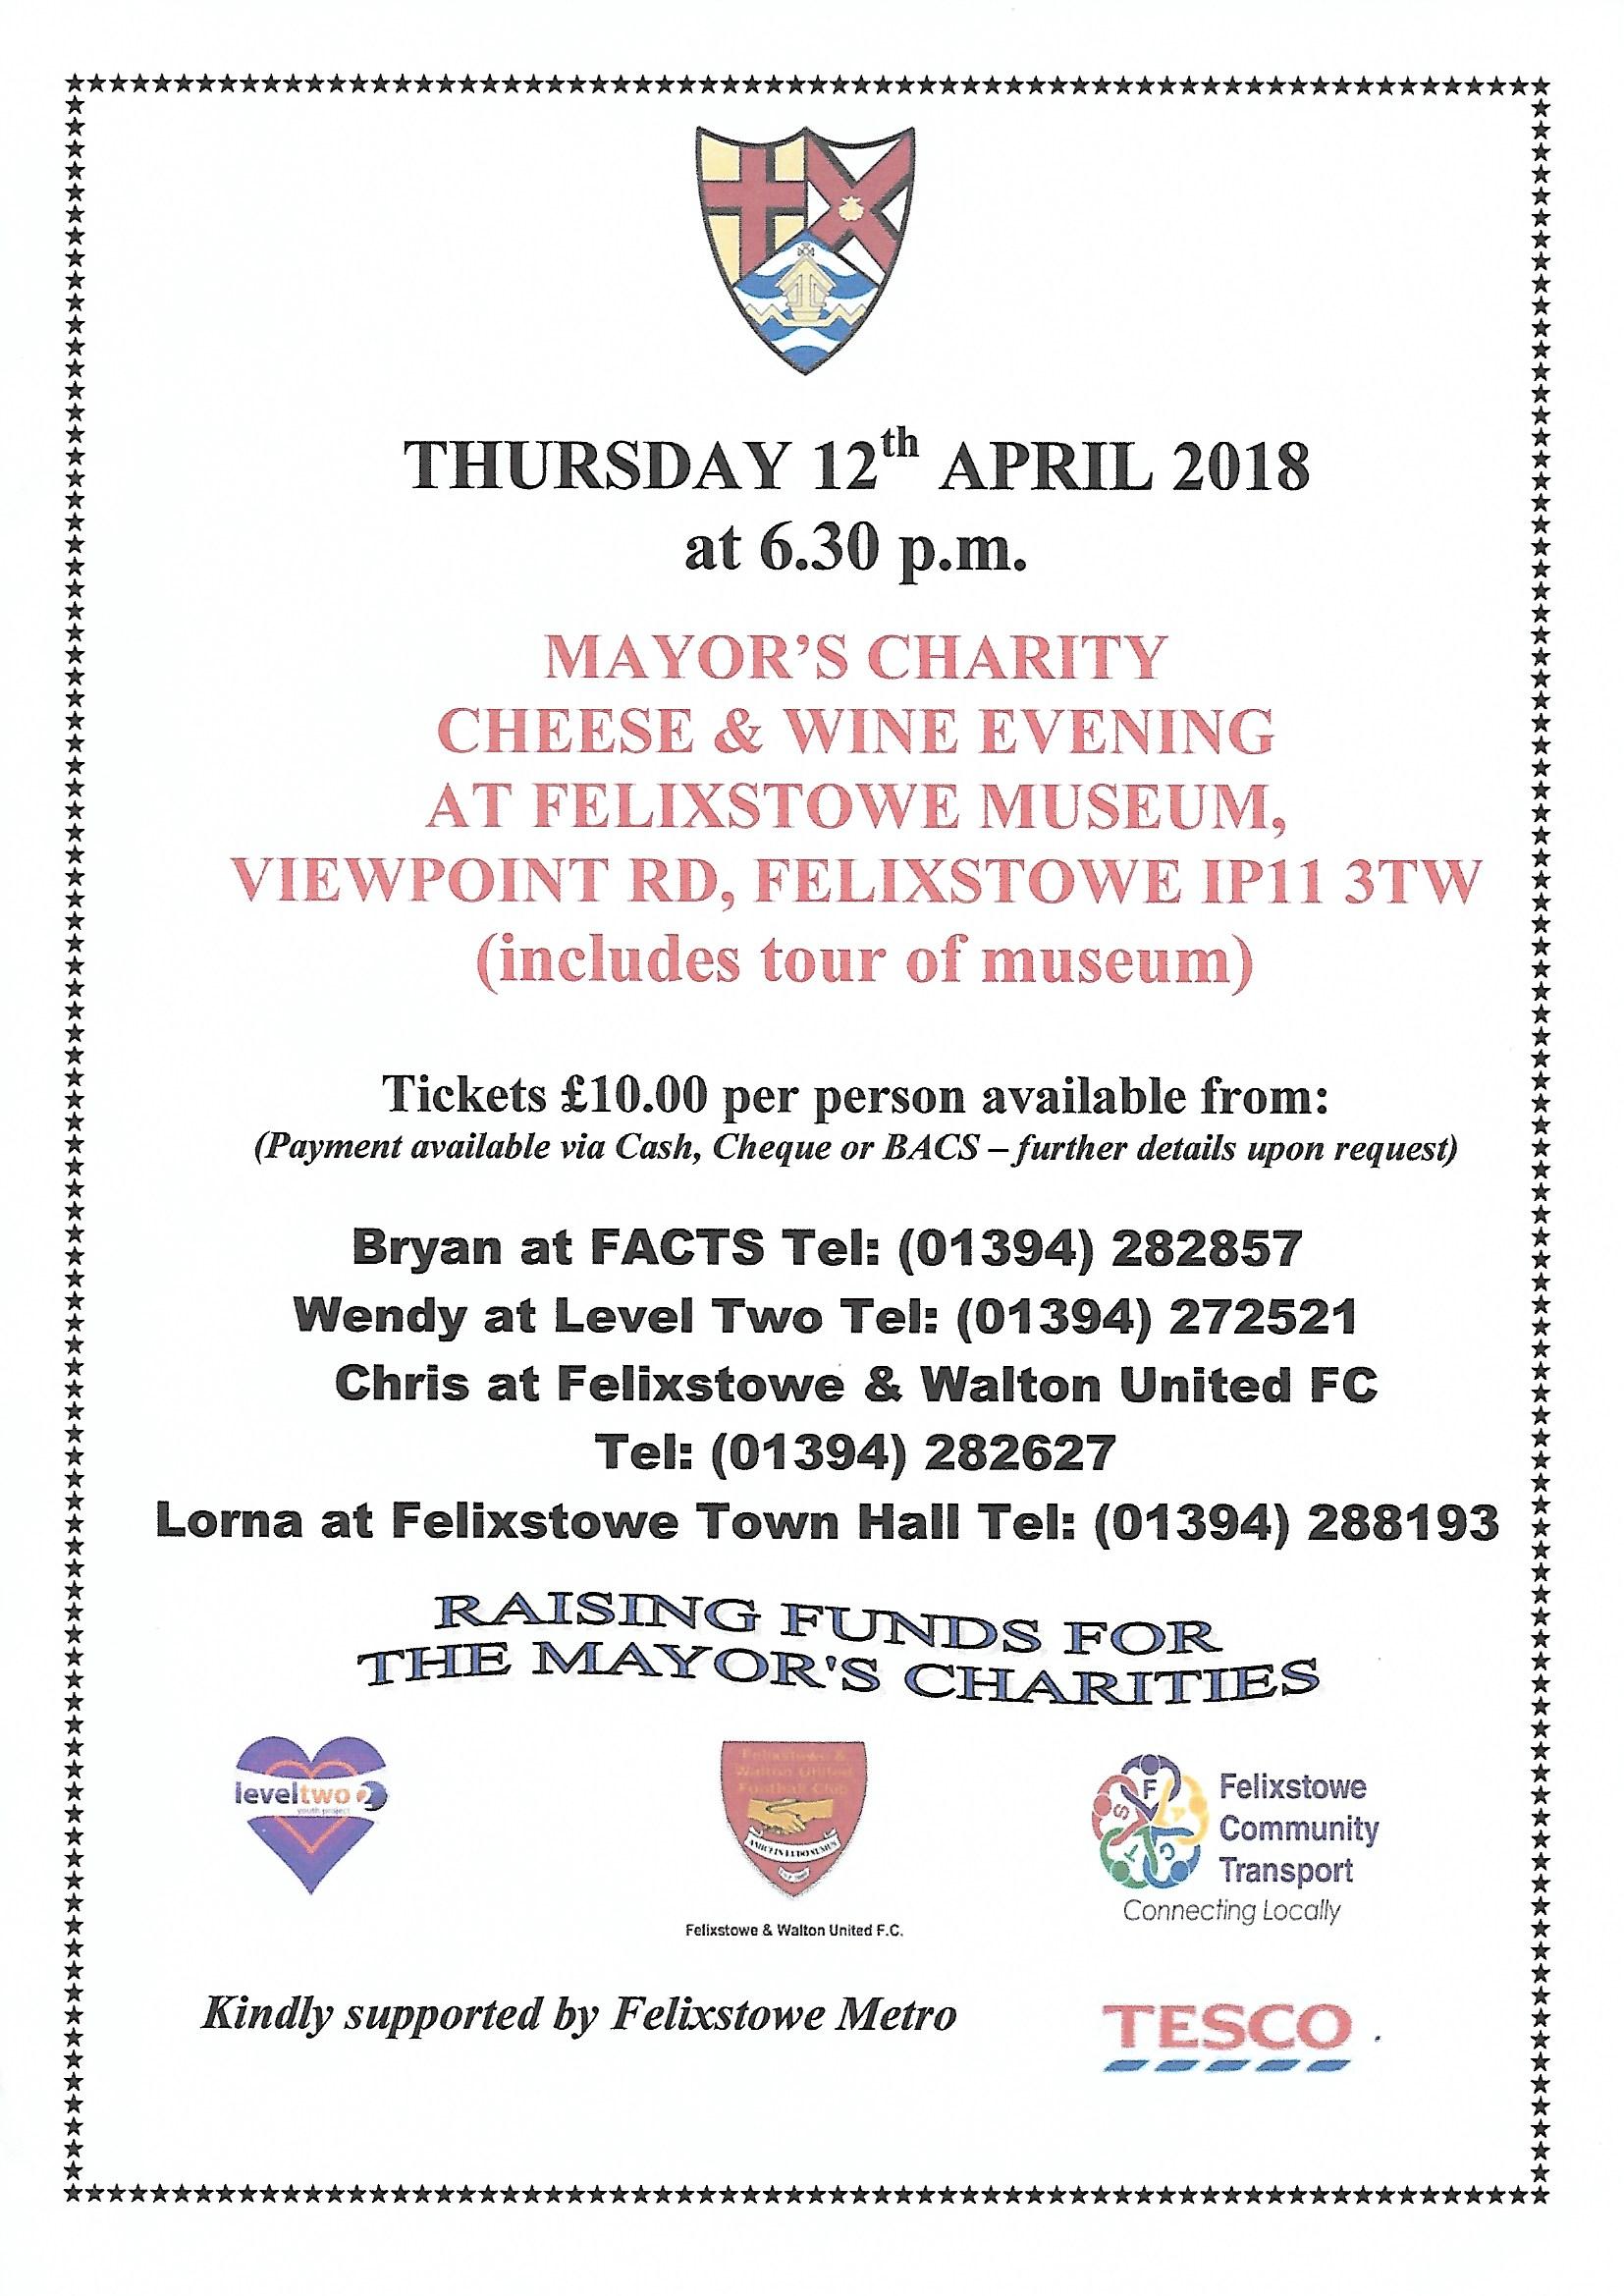 Mayor's Cheese and Wine Evening at Felixstowe Museum, Tuesday 12 April 2018